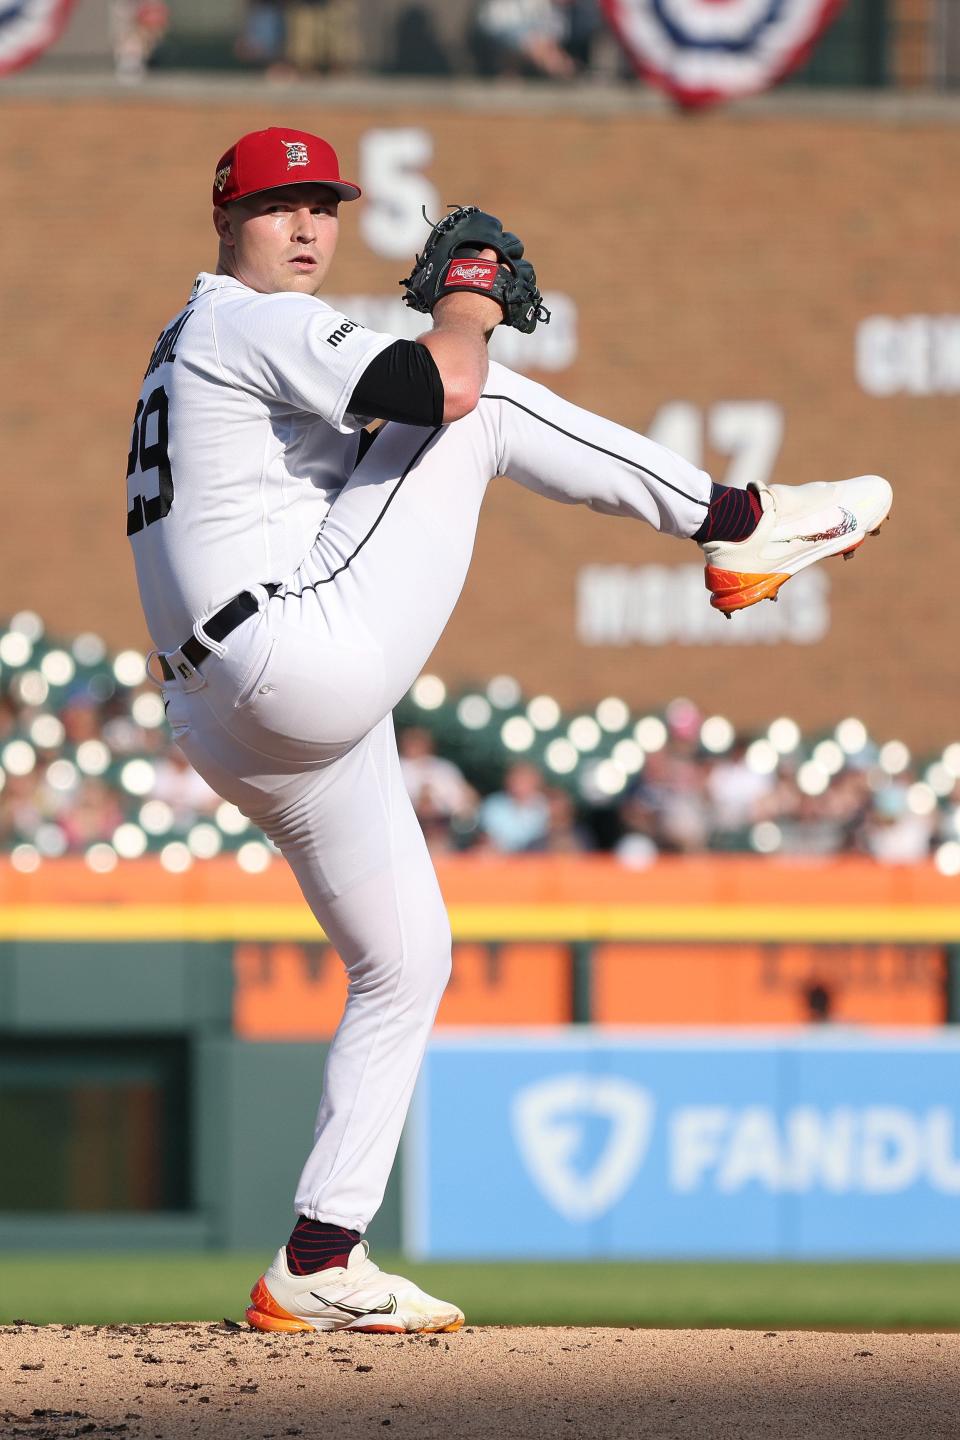 Tigers pitcher Tarik Skubal throws a pitch against the Athletics in the first inning on Monday, July 4, 2023, at Comerica Park.